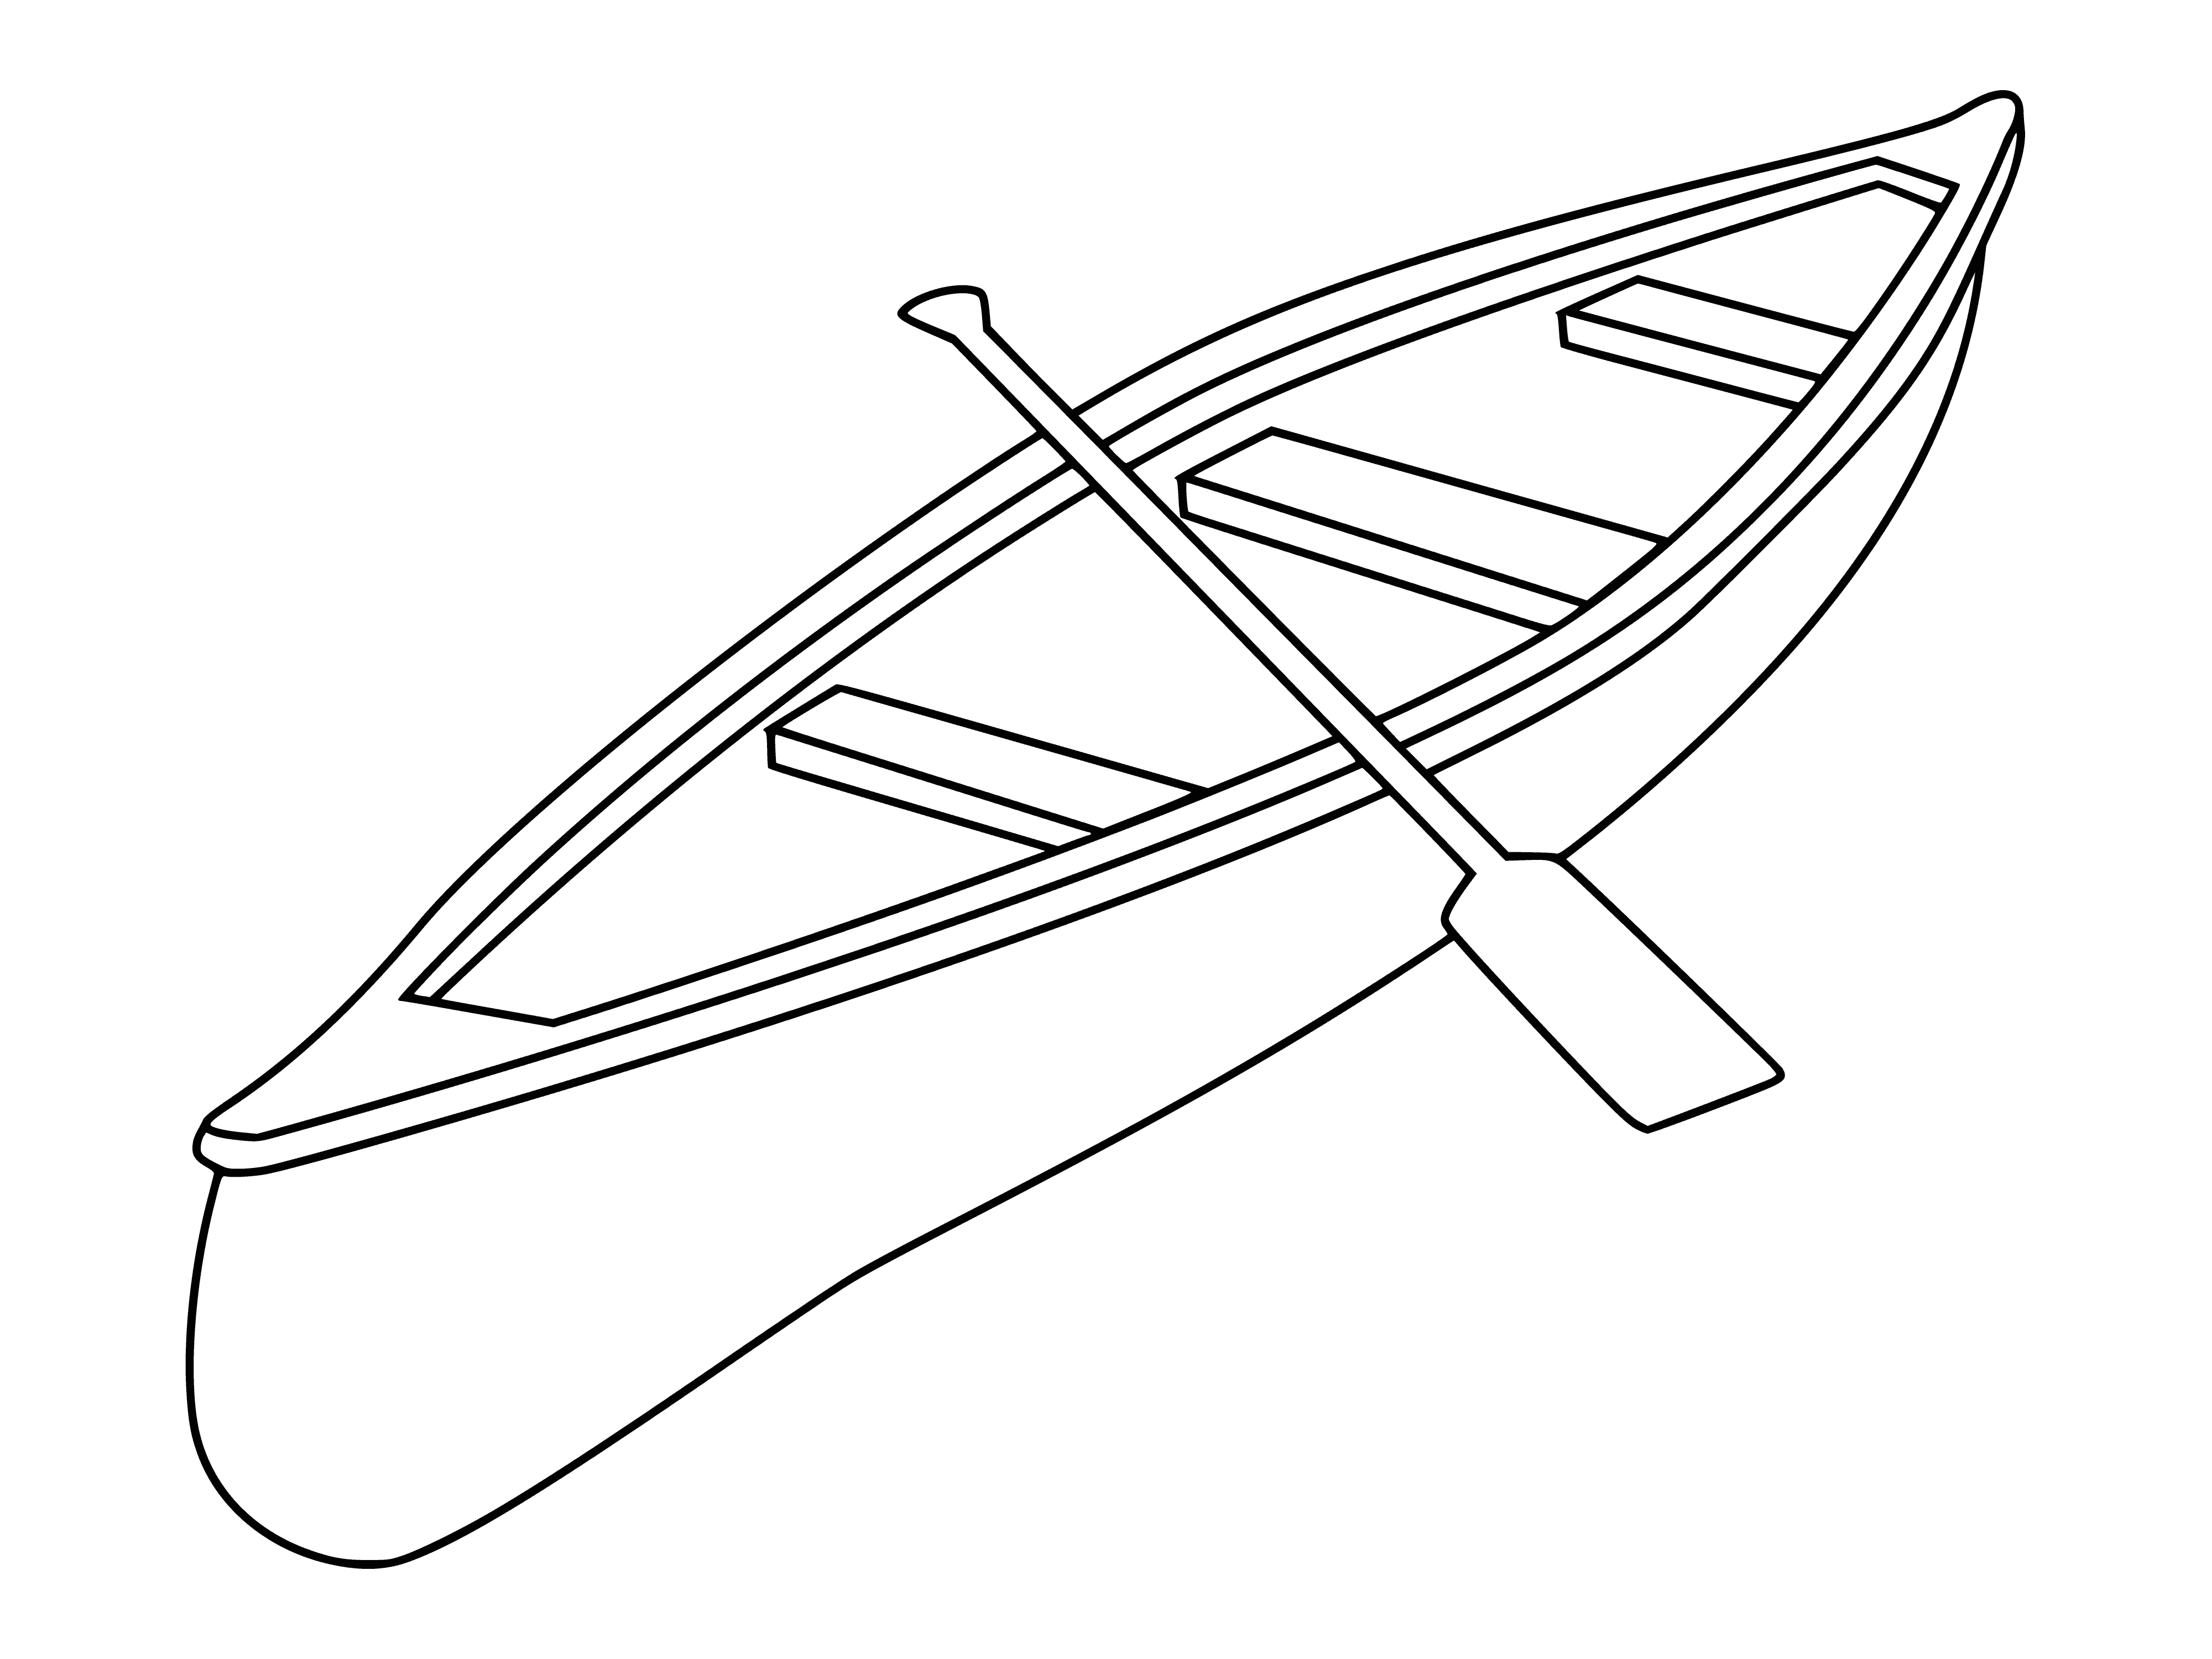 Row boat coloring page